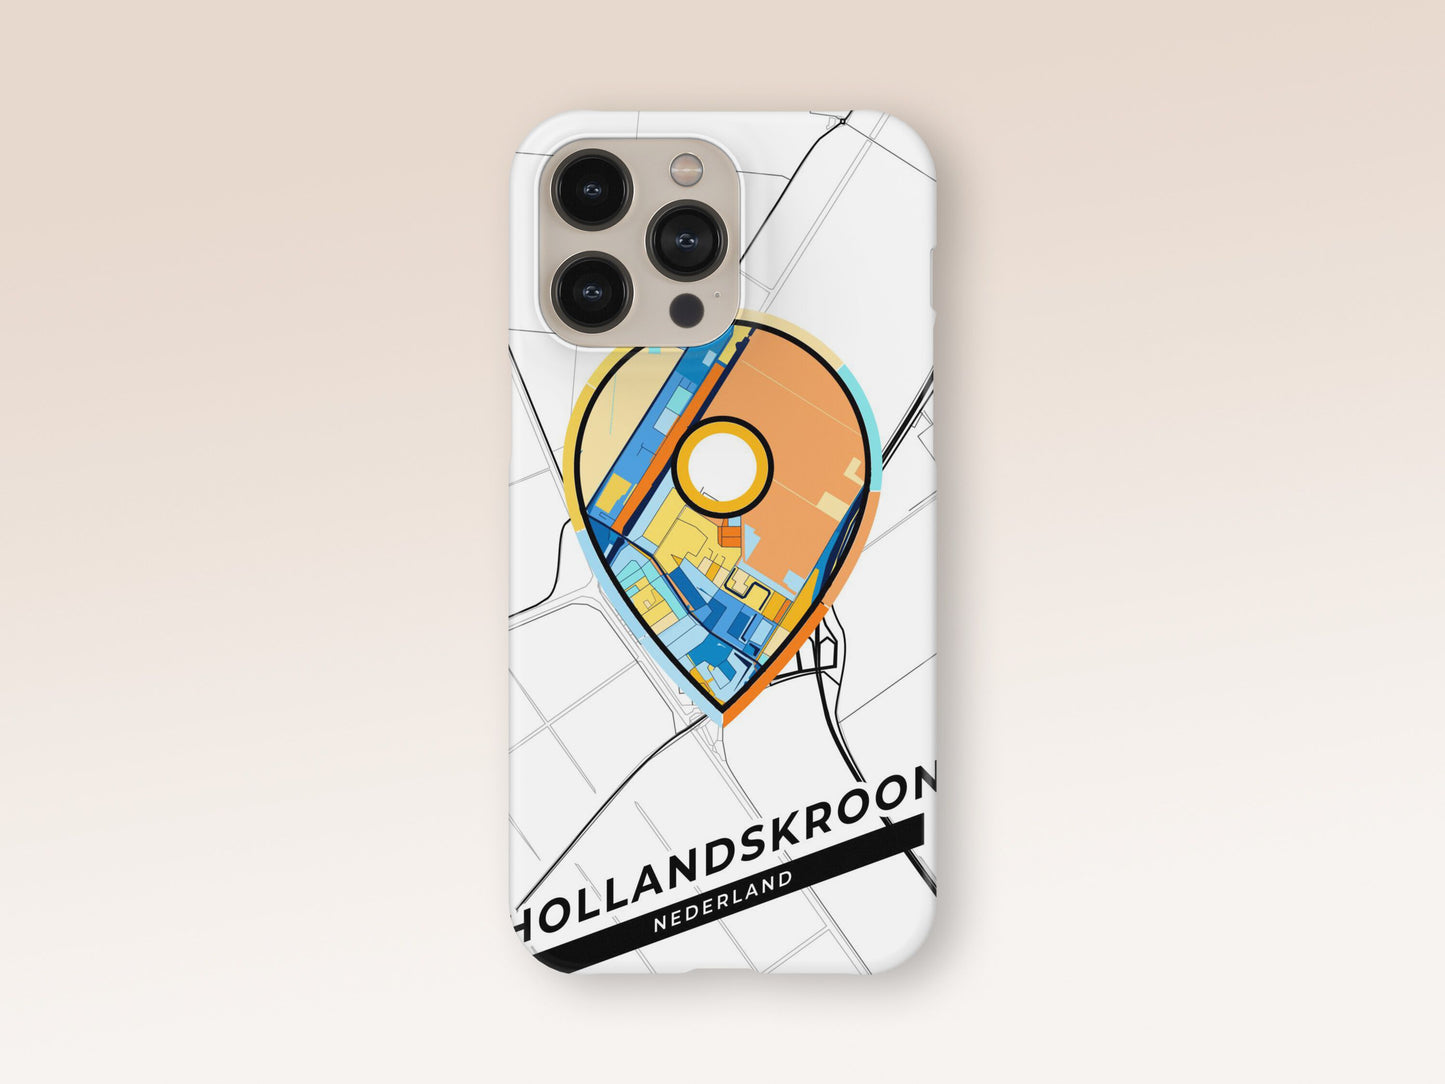 Hollands Kroon Netherlands slim phone case with colorful icon. Birthday, wedding or housewarming gift. Couple match cases. 1